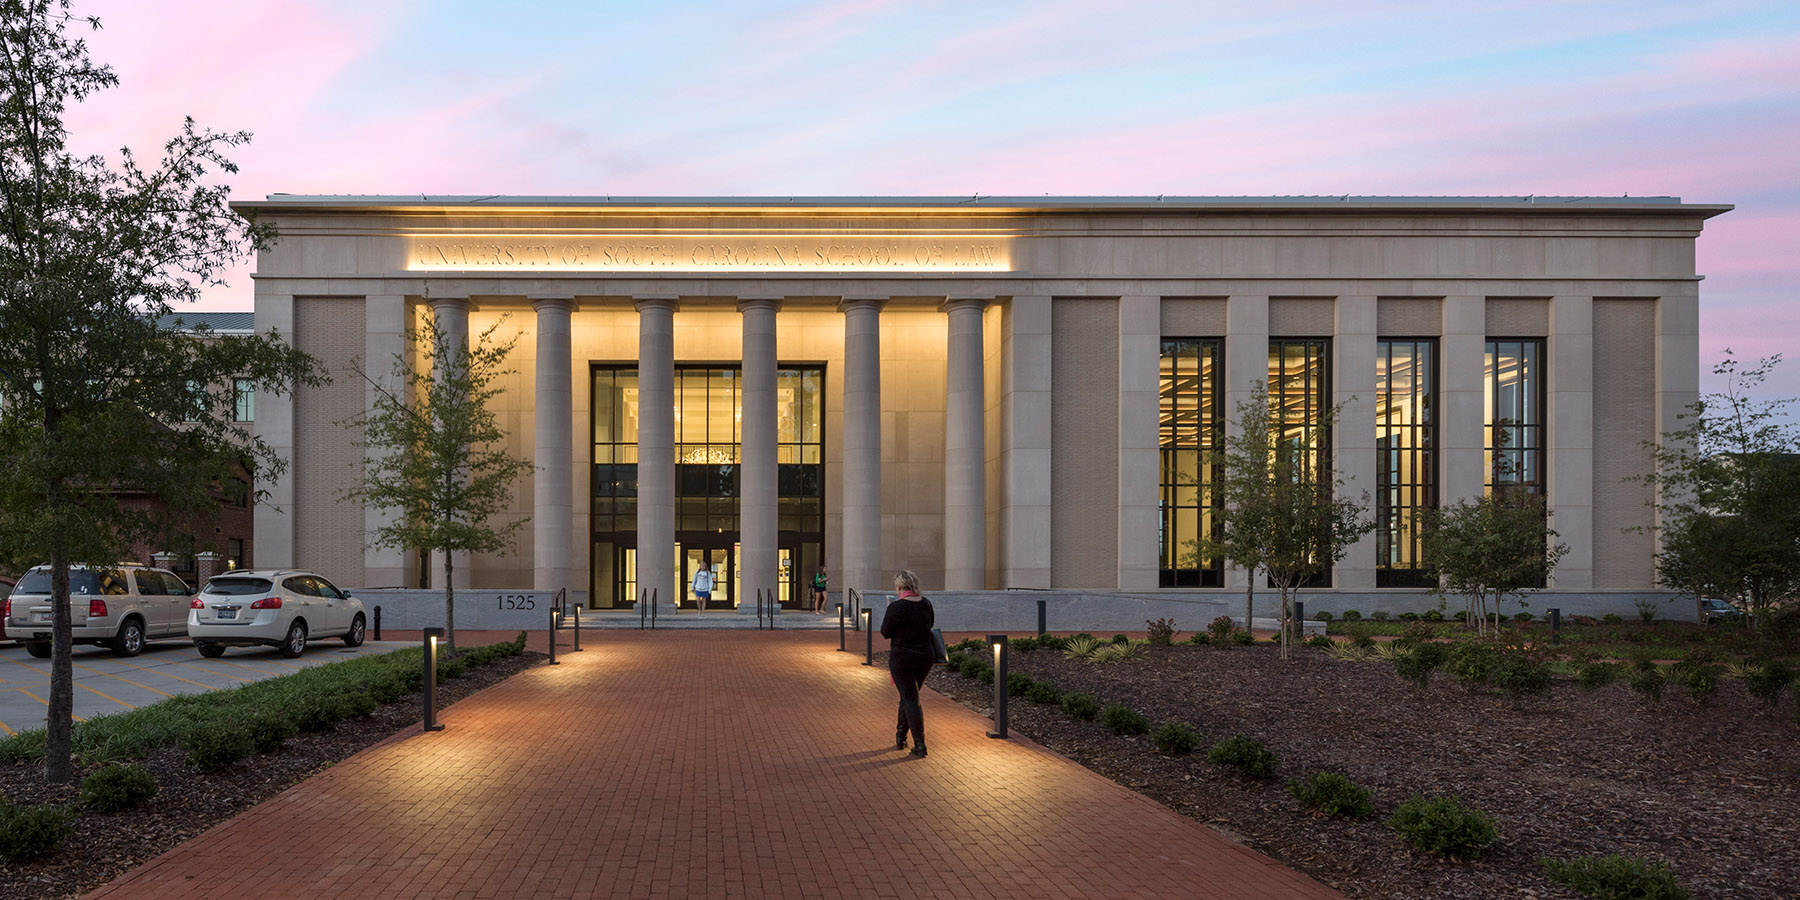 Boudreaux architects and interior designers worked with University of South Carolina on the School of Law project.